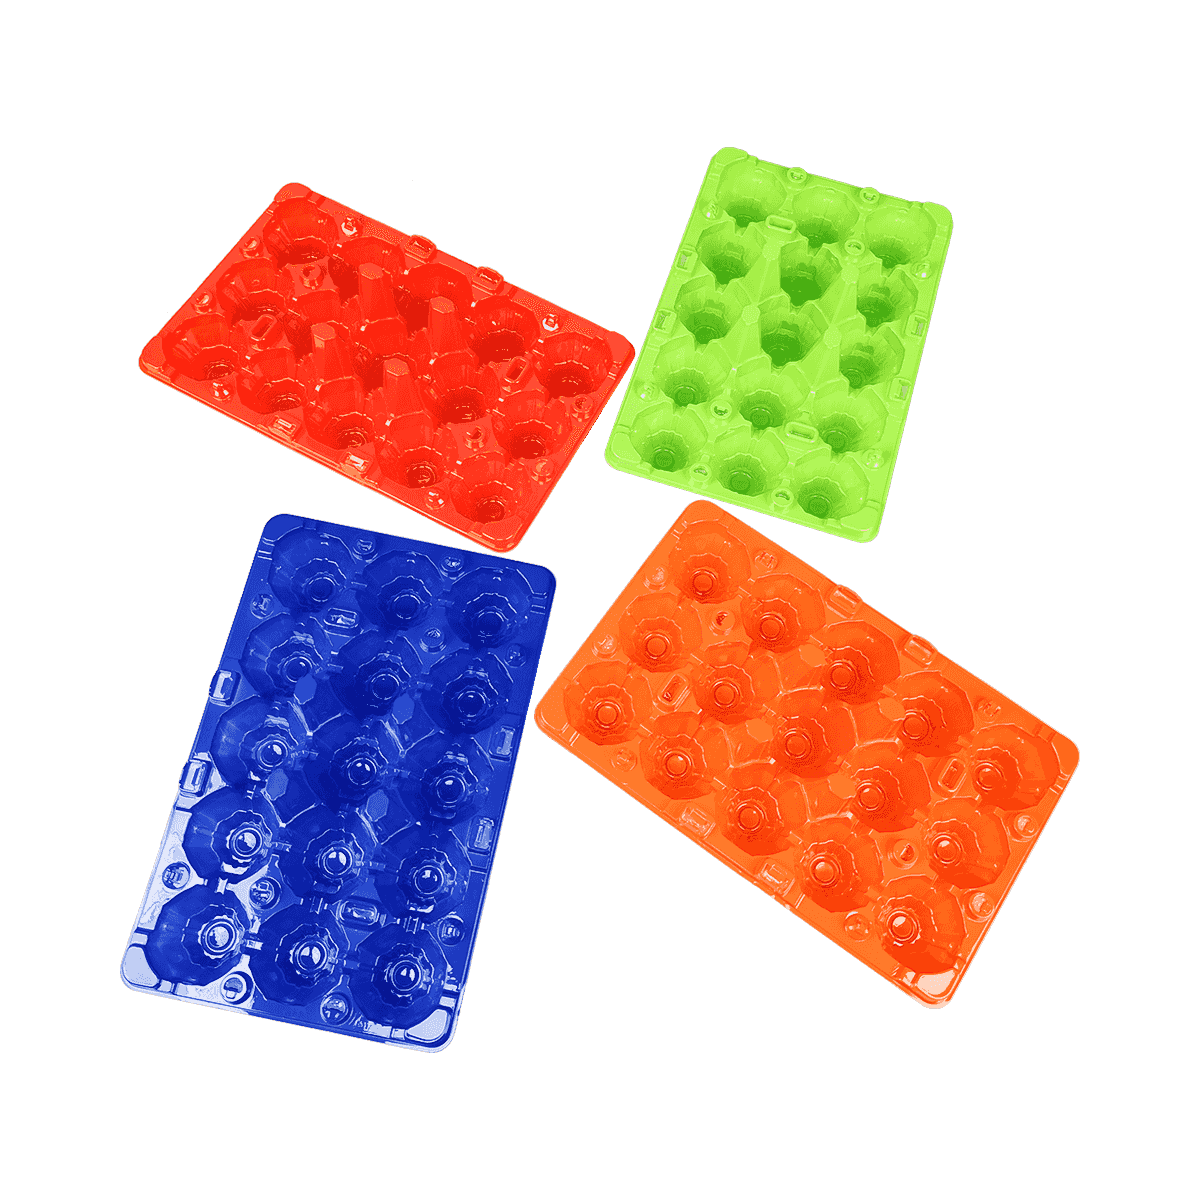 Colored bottom and transparent lid PET 15 egg cartons suitable for home storage